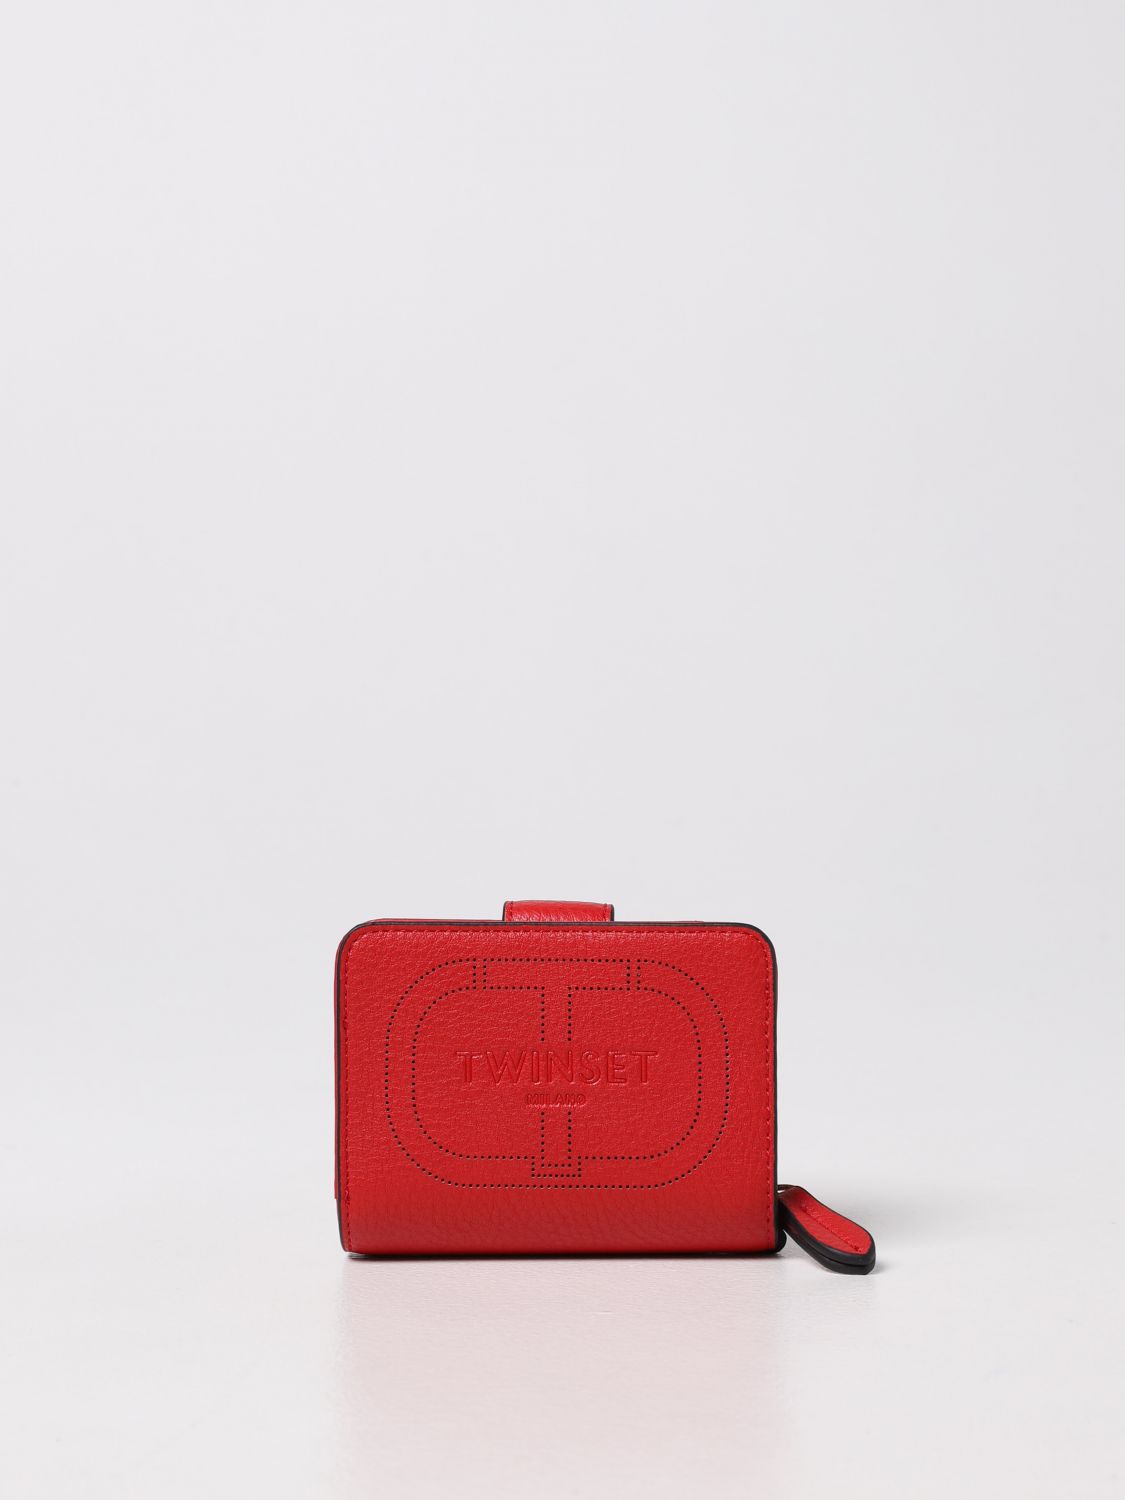 Wallet Twinset: Twinset wallet in grained synthetic leather red 1